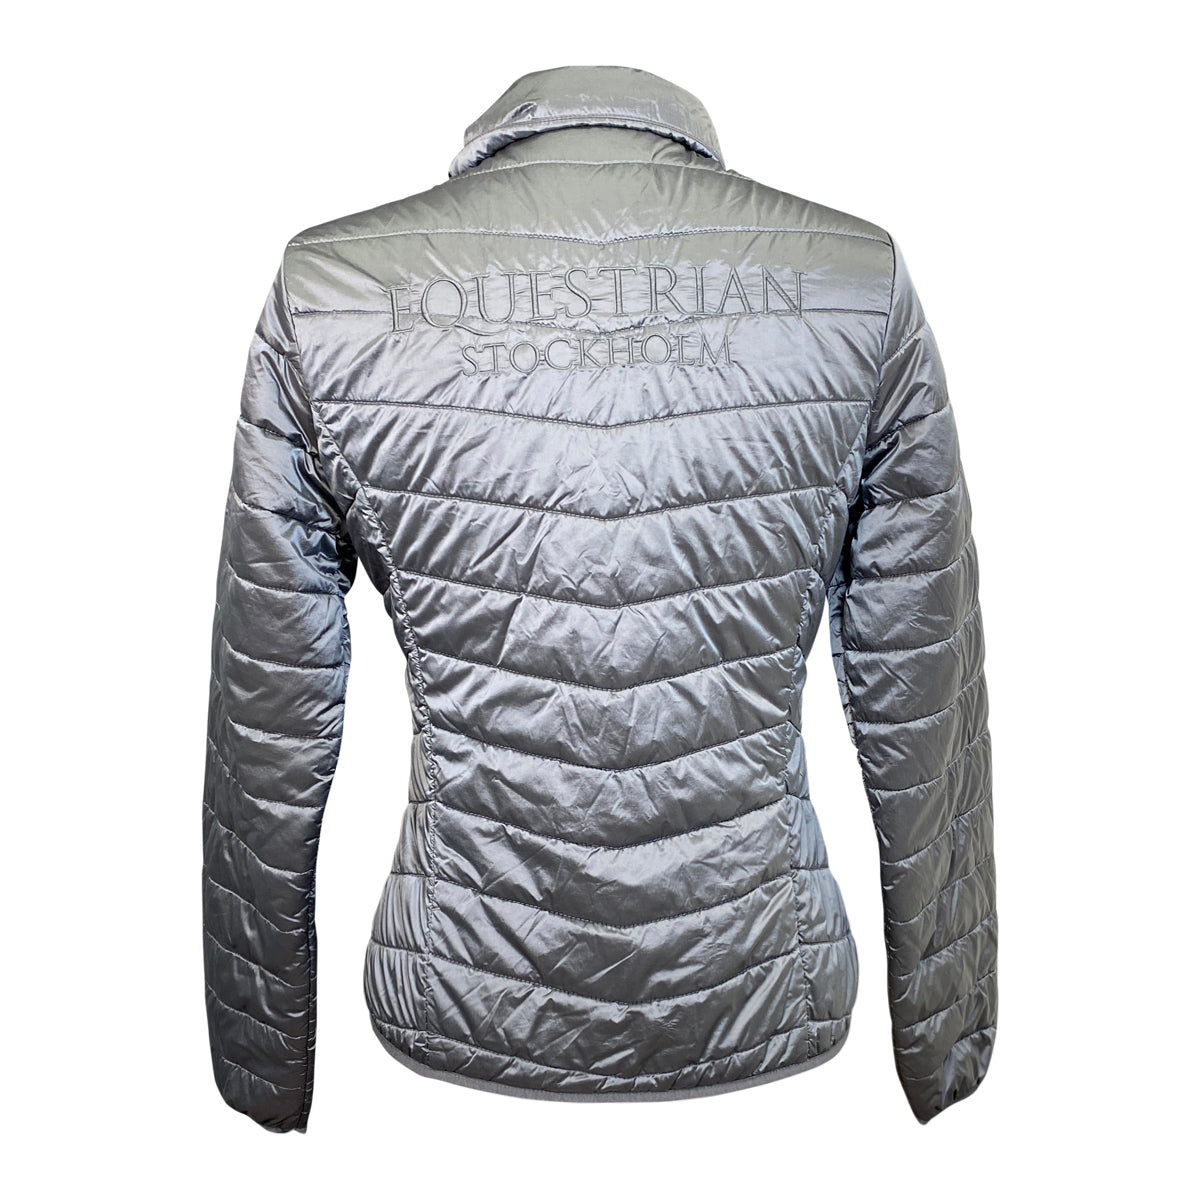 Equestrian Stockholm Light Weight Jacket  in Silver